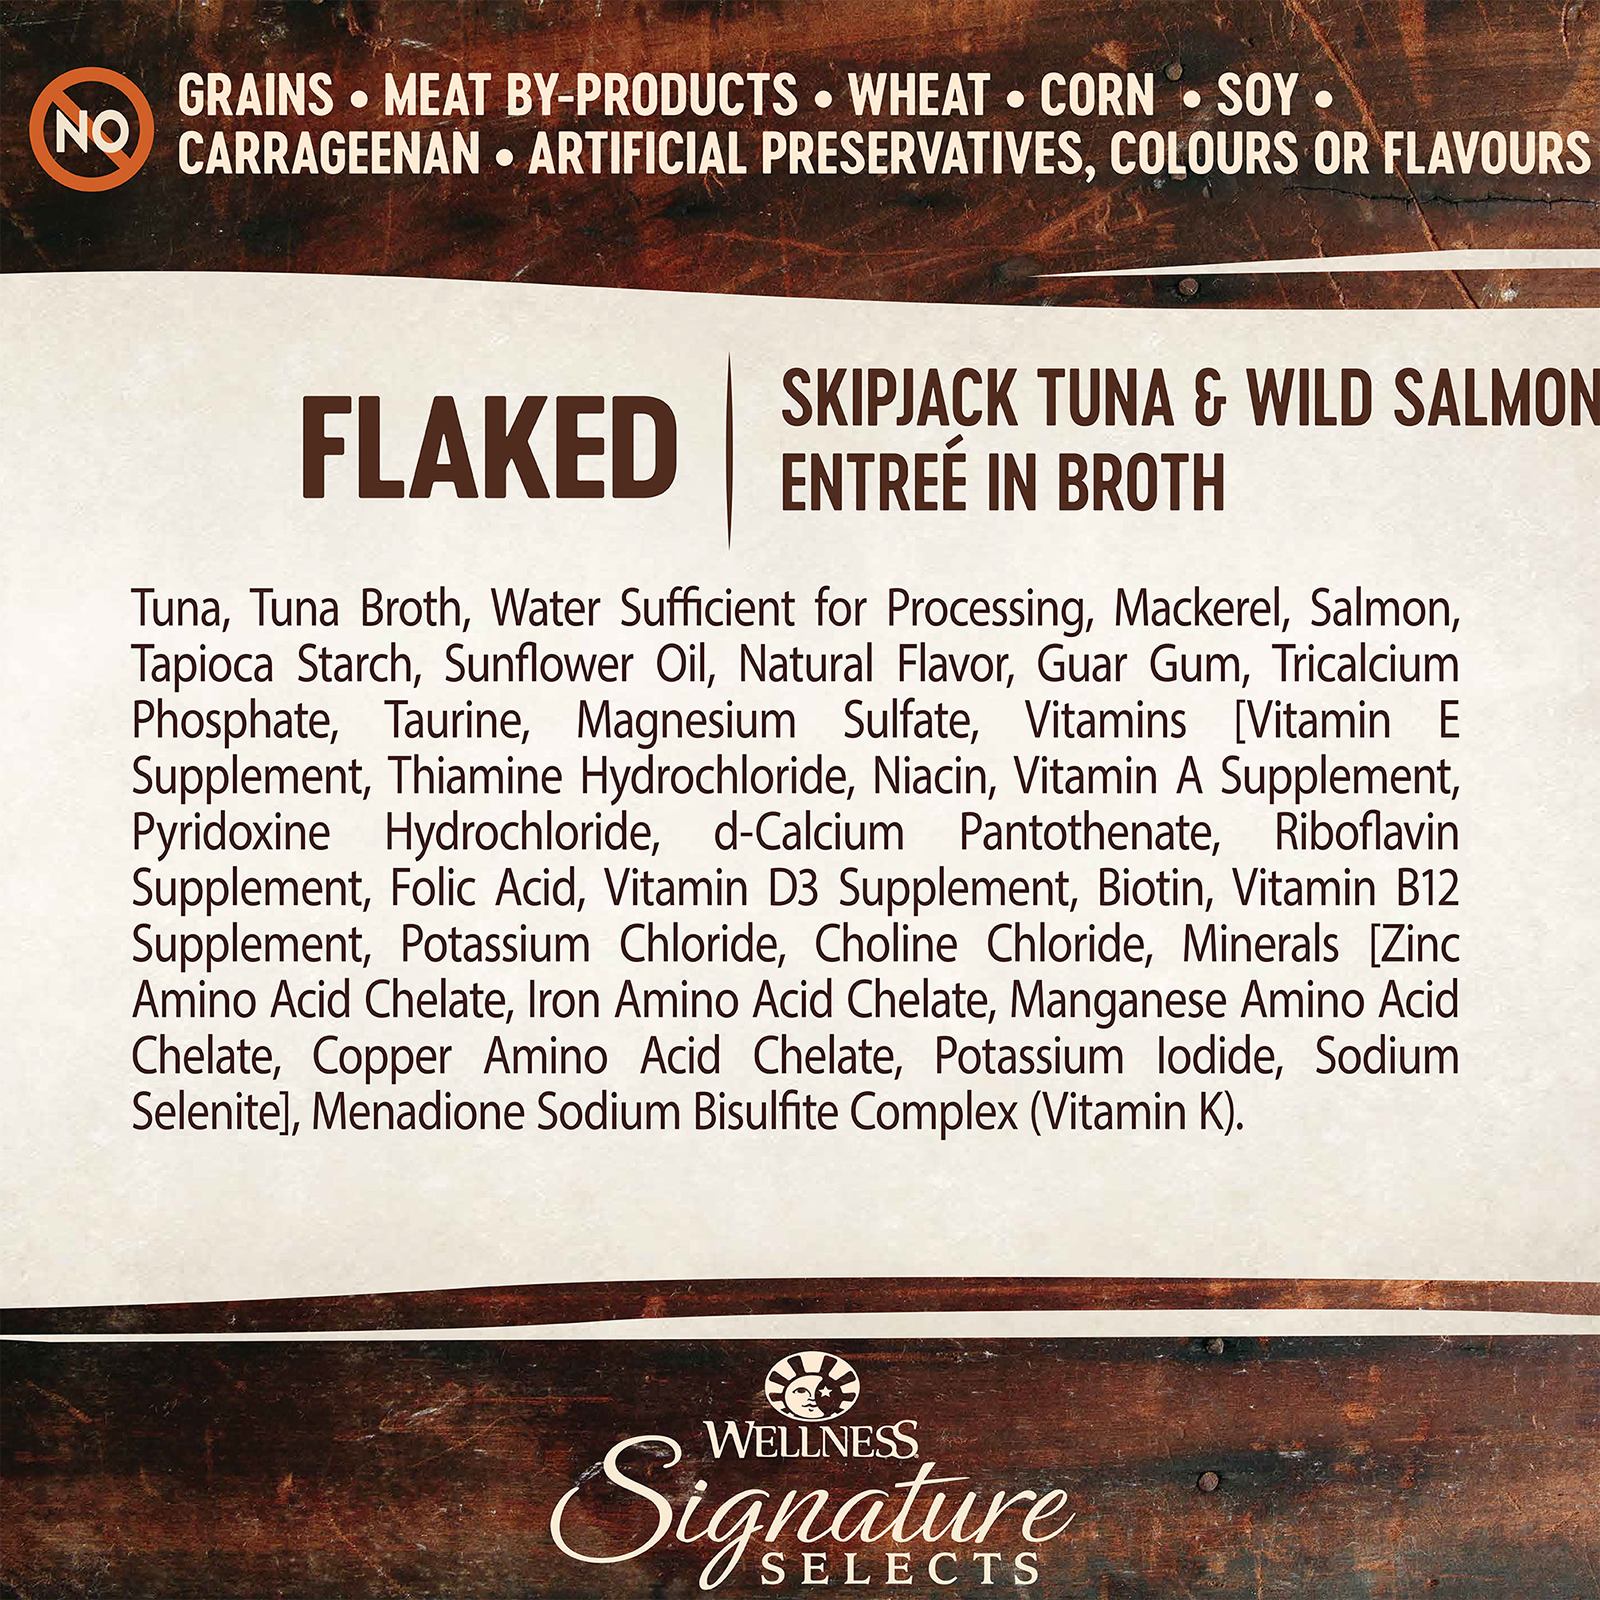 Wellness CORE Signature Selects Cat Food Can Adult Flaked Skipjack Tuna & Wild Salmon Entreé